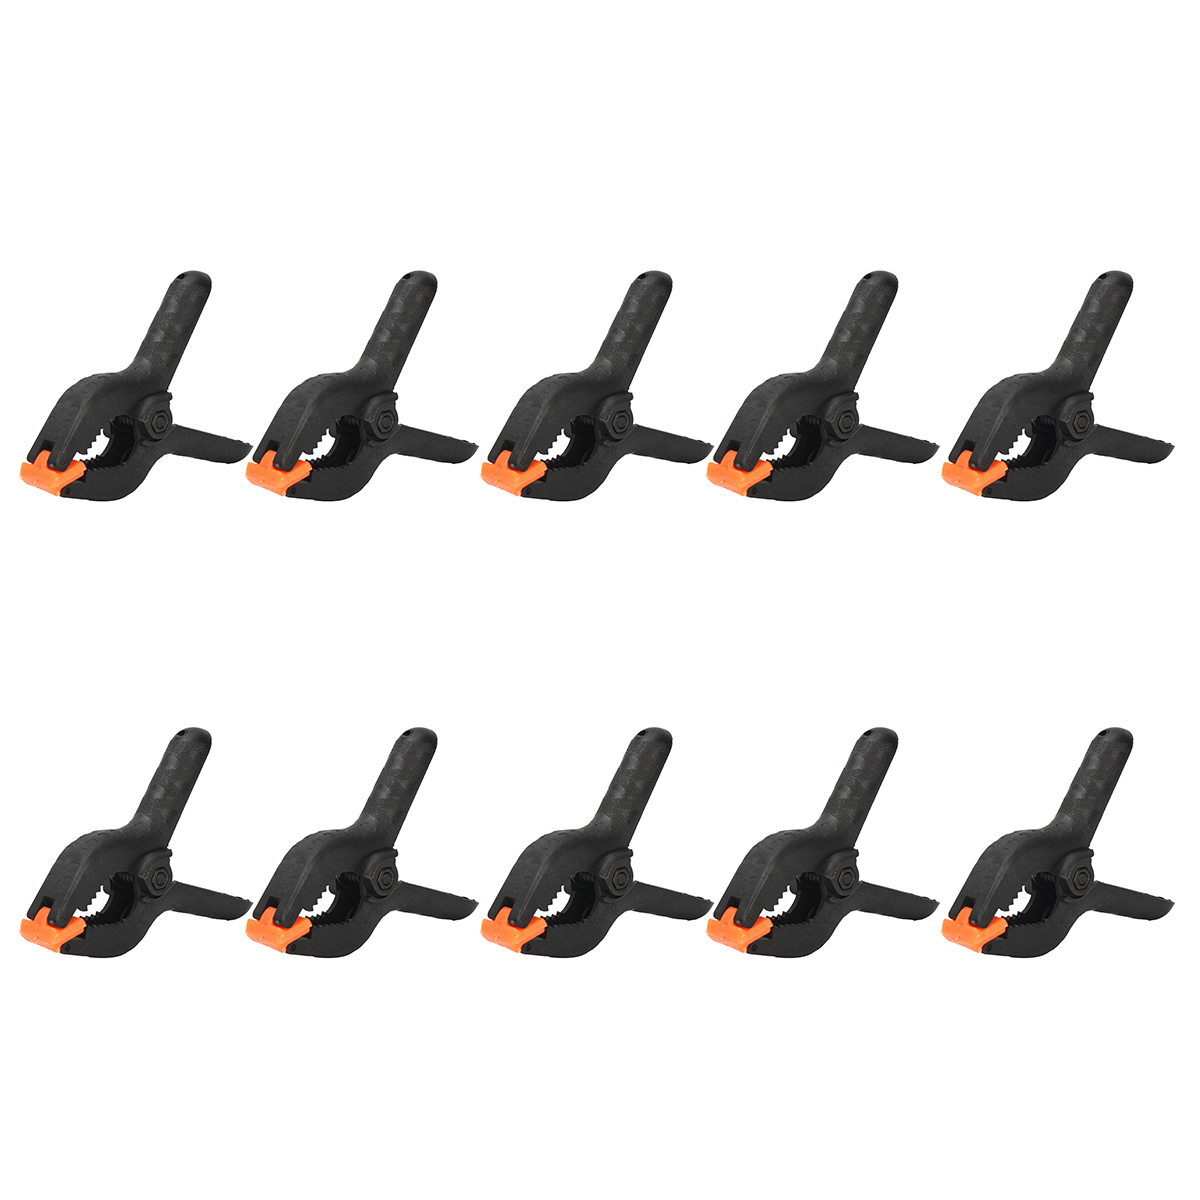 10PCS-4-inch-Spring-Clamps-DIY-Tools-Plastic-Nylon-For-Woodworking-Hobbies-1156342-2